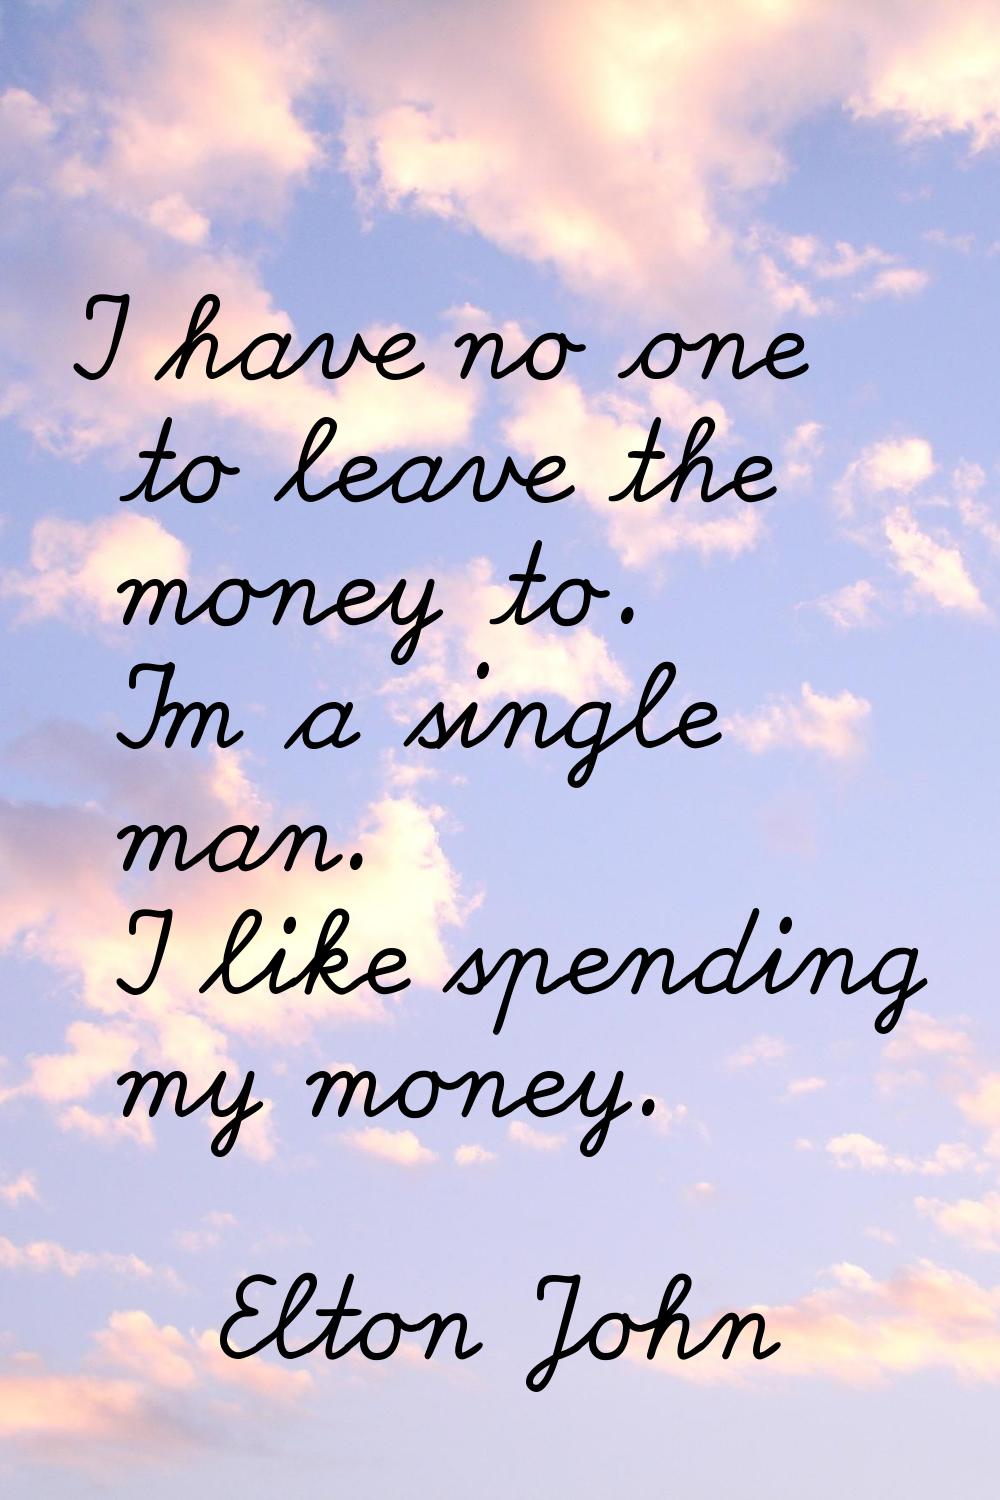 I have no one to leave the money to. I'm a single man. I like spending my money.